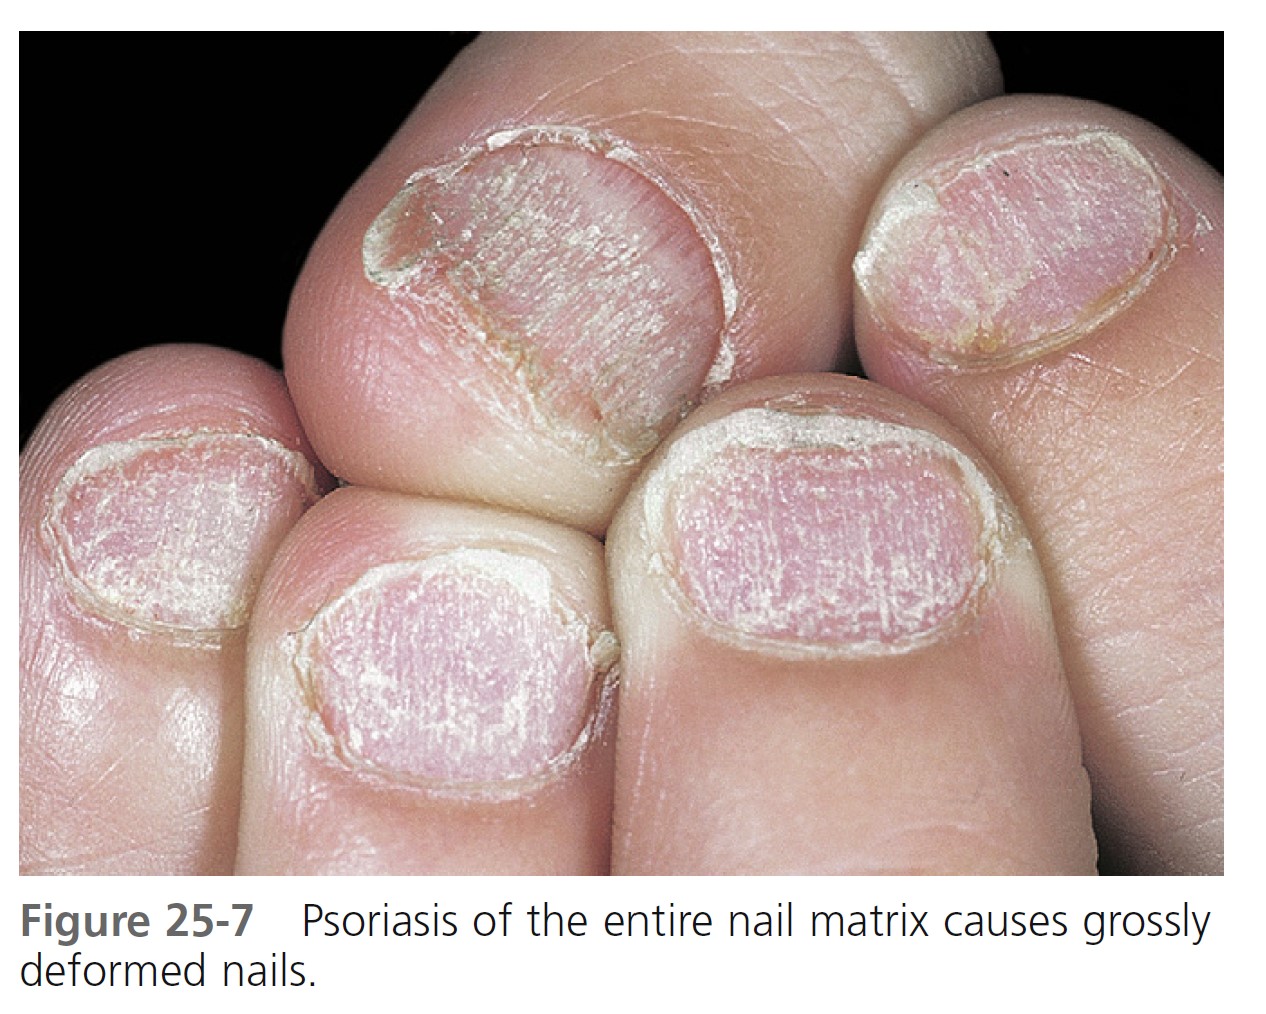 What can my nails tell me about my health? - The Washington Post